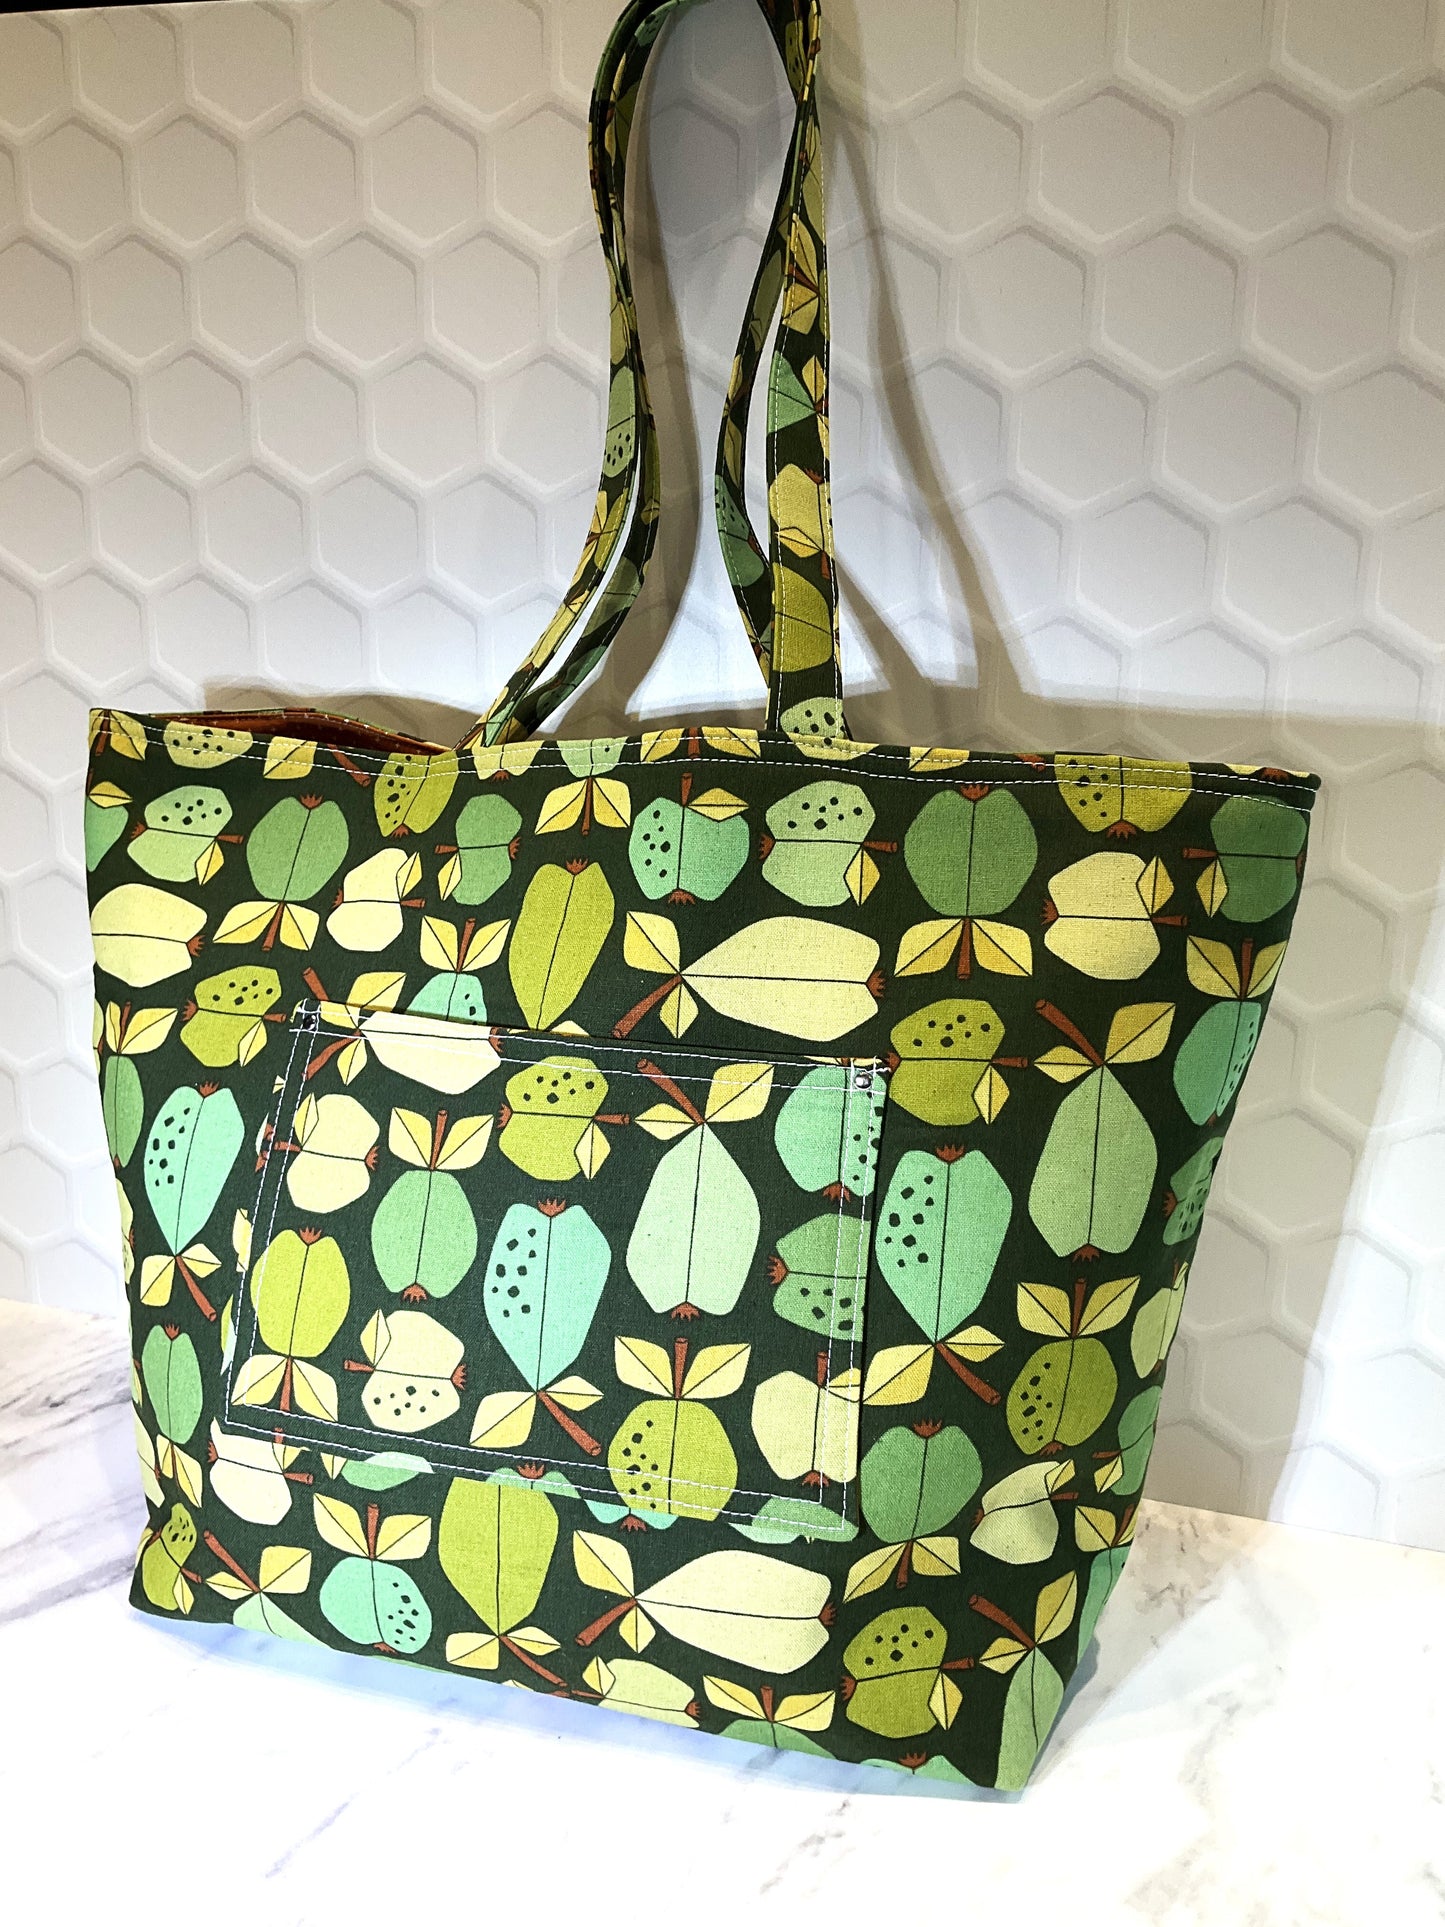 Chubby Tote - Apples & Pears